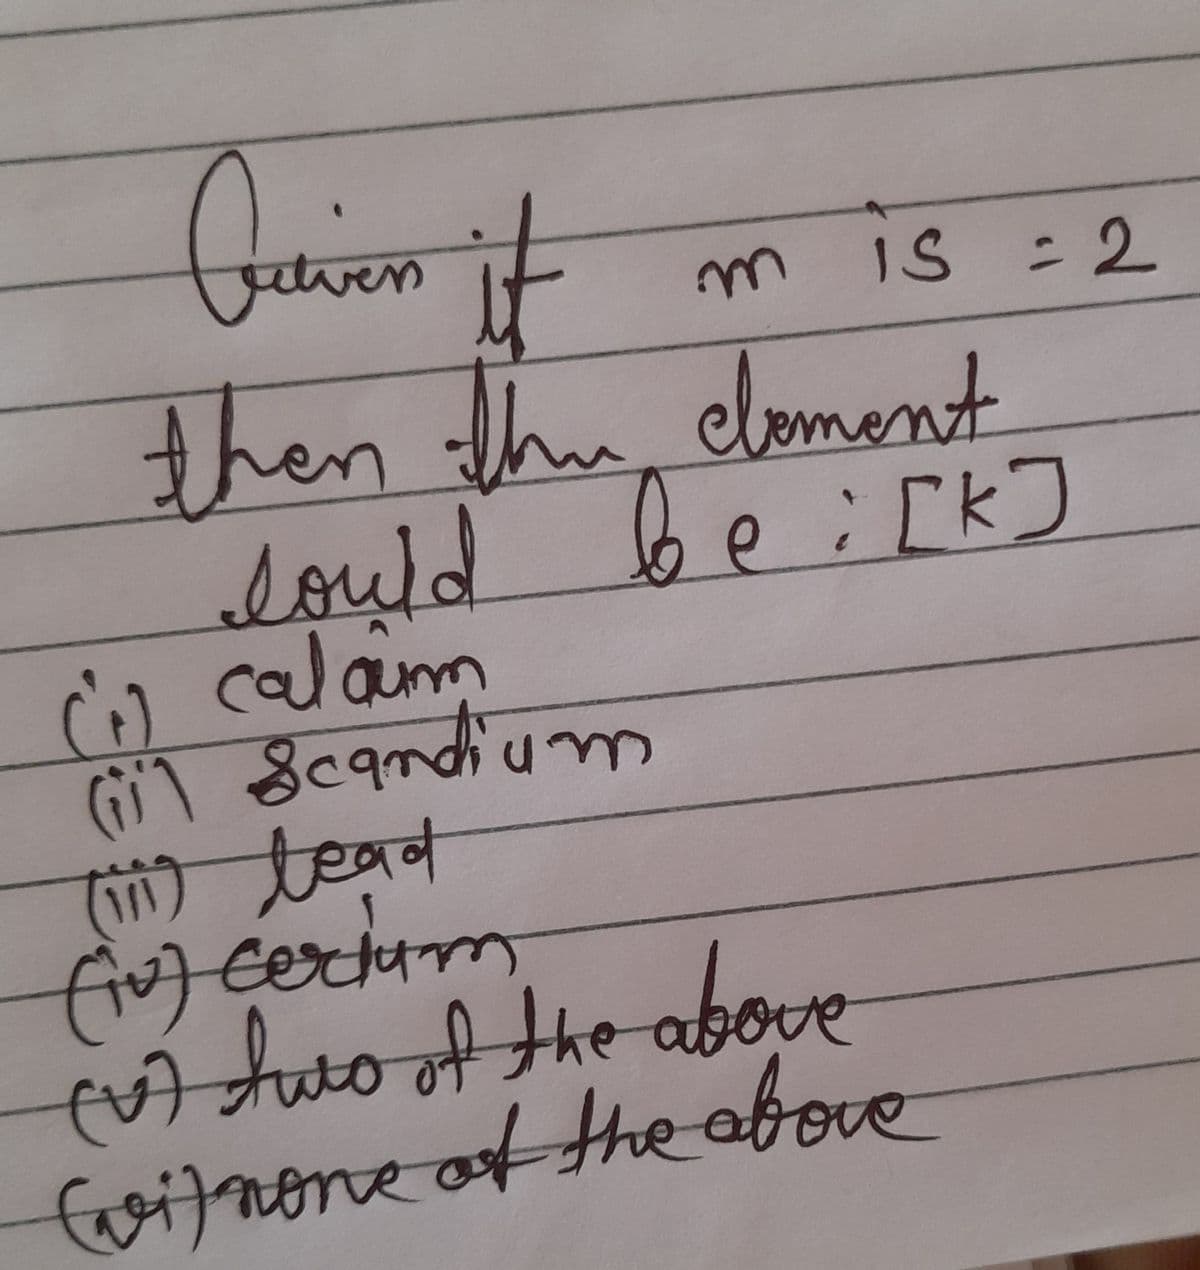 Quien it
then the element
lould be i[k]
(1) calaim
(ii) Scandium
(iii) lead
(1) certum
(V) two of the above
(vi) none of the above
is = 2